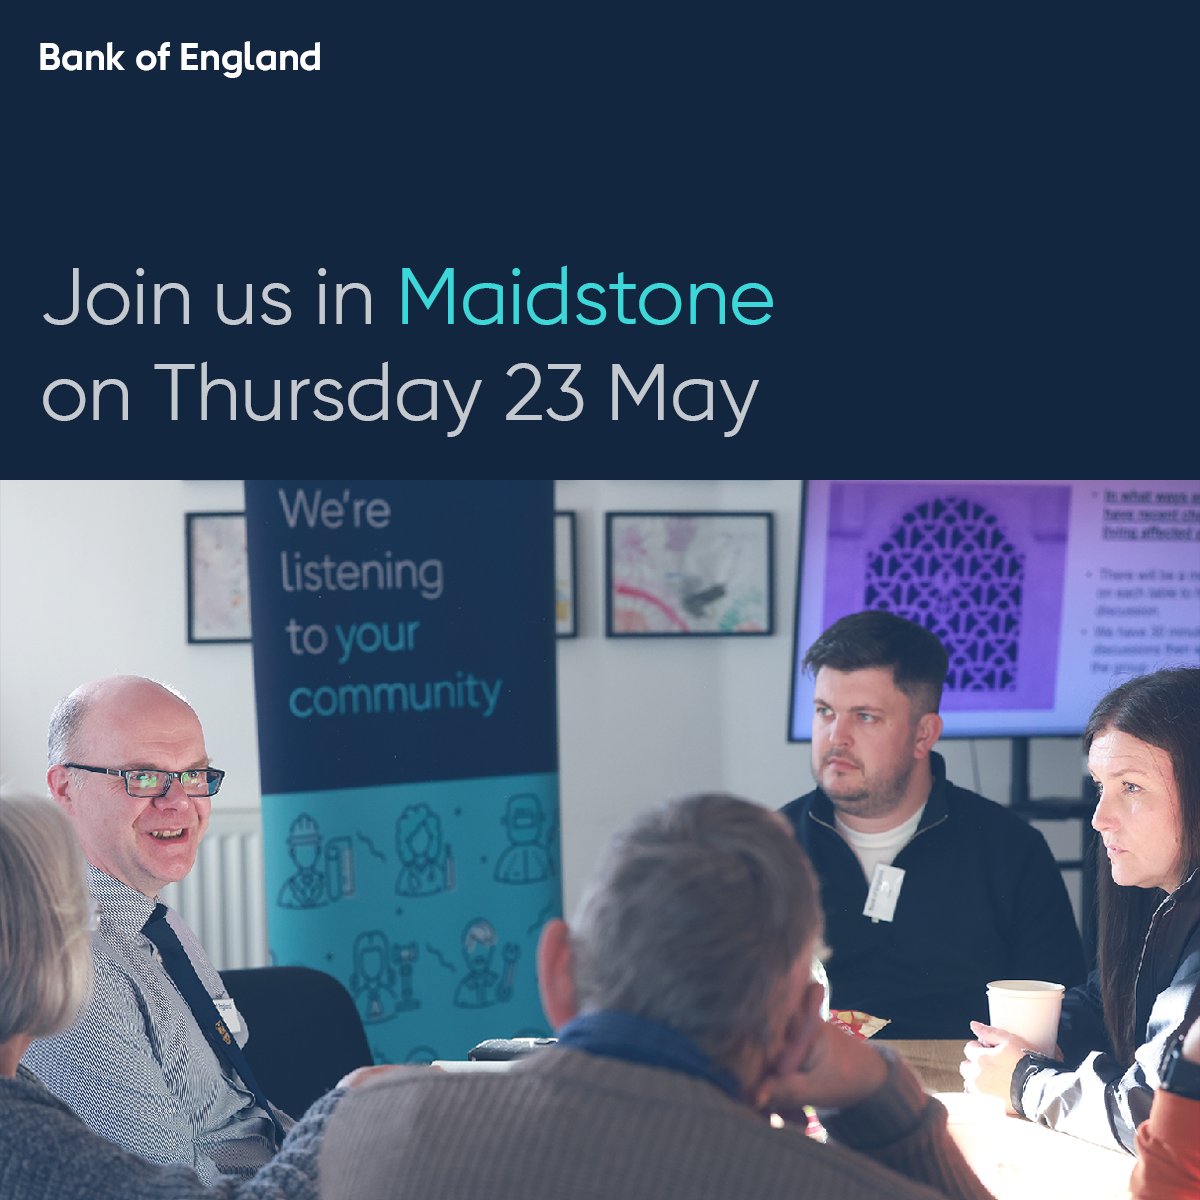 Want to tell us about your experience of the economy and the cost of living? Sign up to register your interest in joining our in-person Citizens’ Panel in Maidstone on Thursday 23 May from 5.45pm – 8pm. Sign up here: b-o-e.uk/3UcFIUZ Registration closes on 14 May.